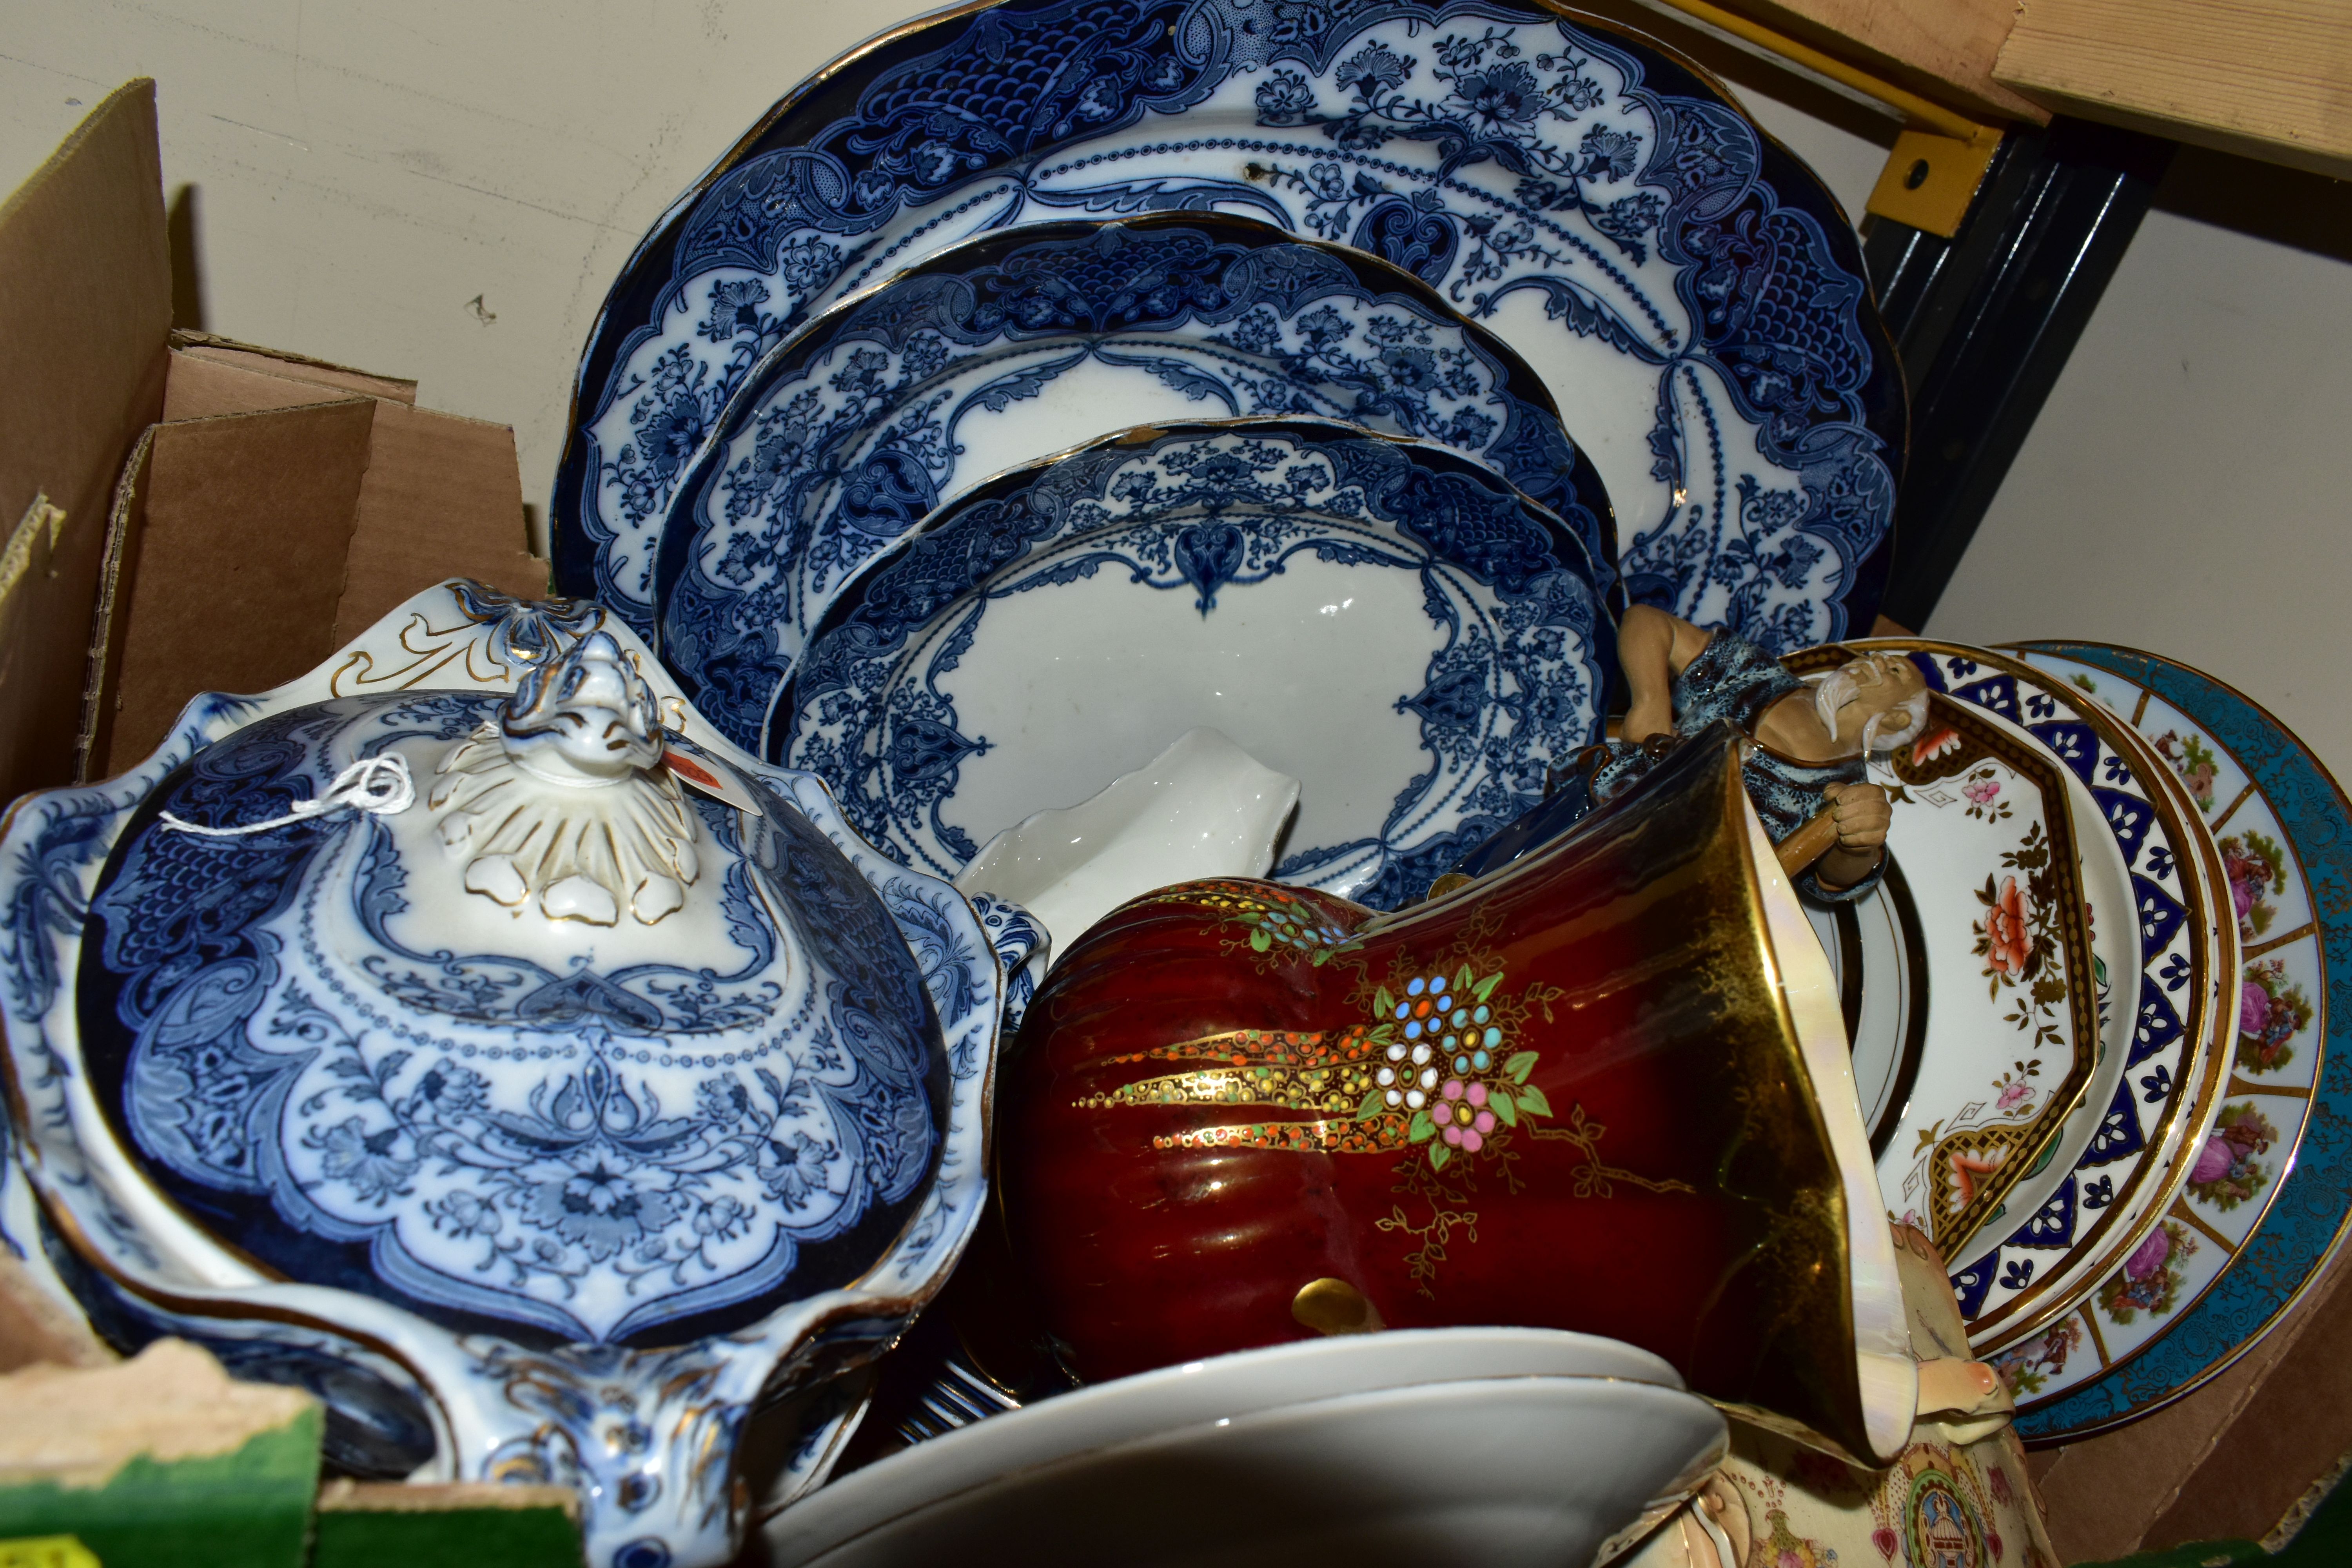 TWO BOXES OF AYNSLEY 'DEVONSHIRE' PATTERN DINNER WARES, BLUE & WHITE DINNER WARES, ASSORTED TEA - Image 3 of 3